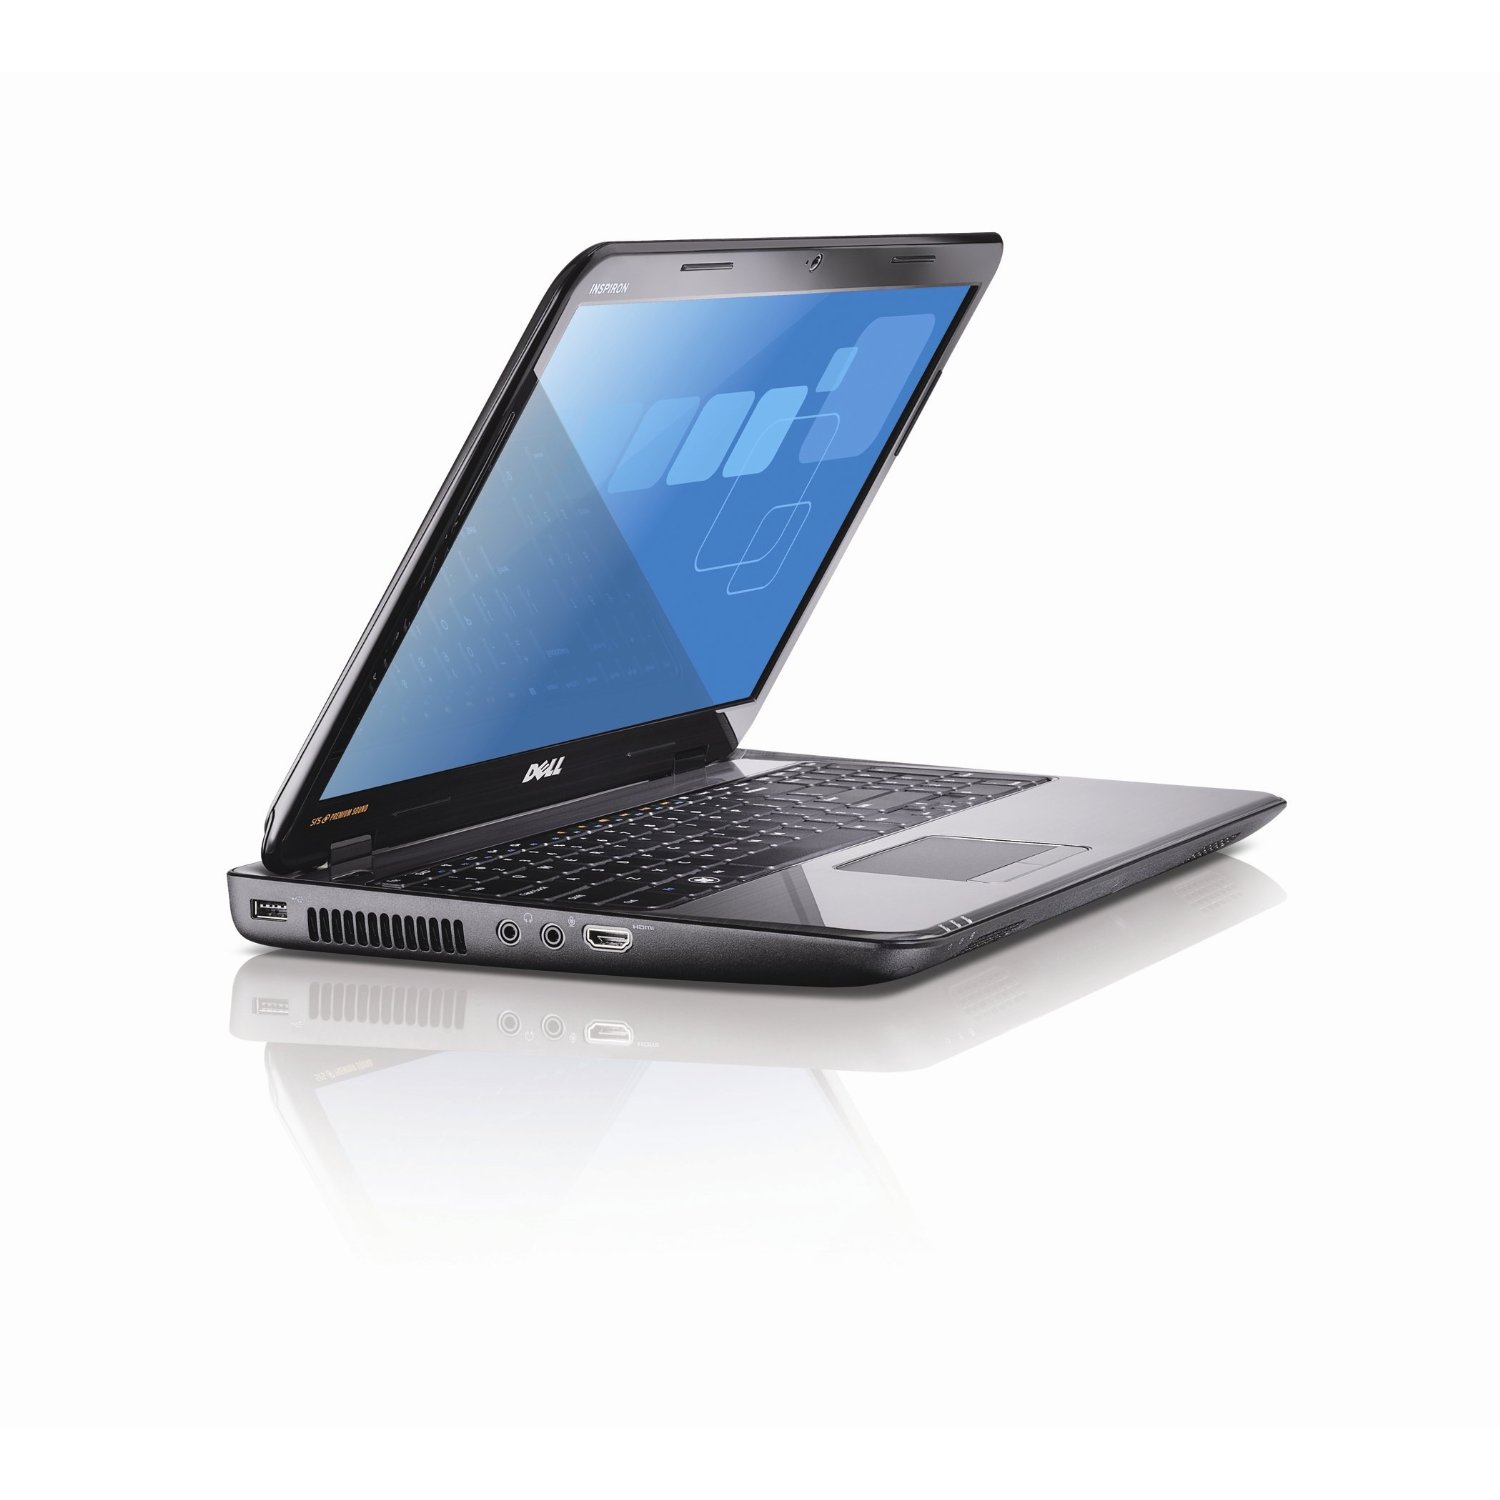 http://thetechjournal.com/wp-content/uploads/images/1110/1318421913-dell-inspiron-15r-i15rn51107223dbk-156inch-laptop-8.jpg